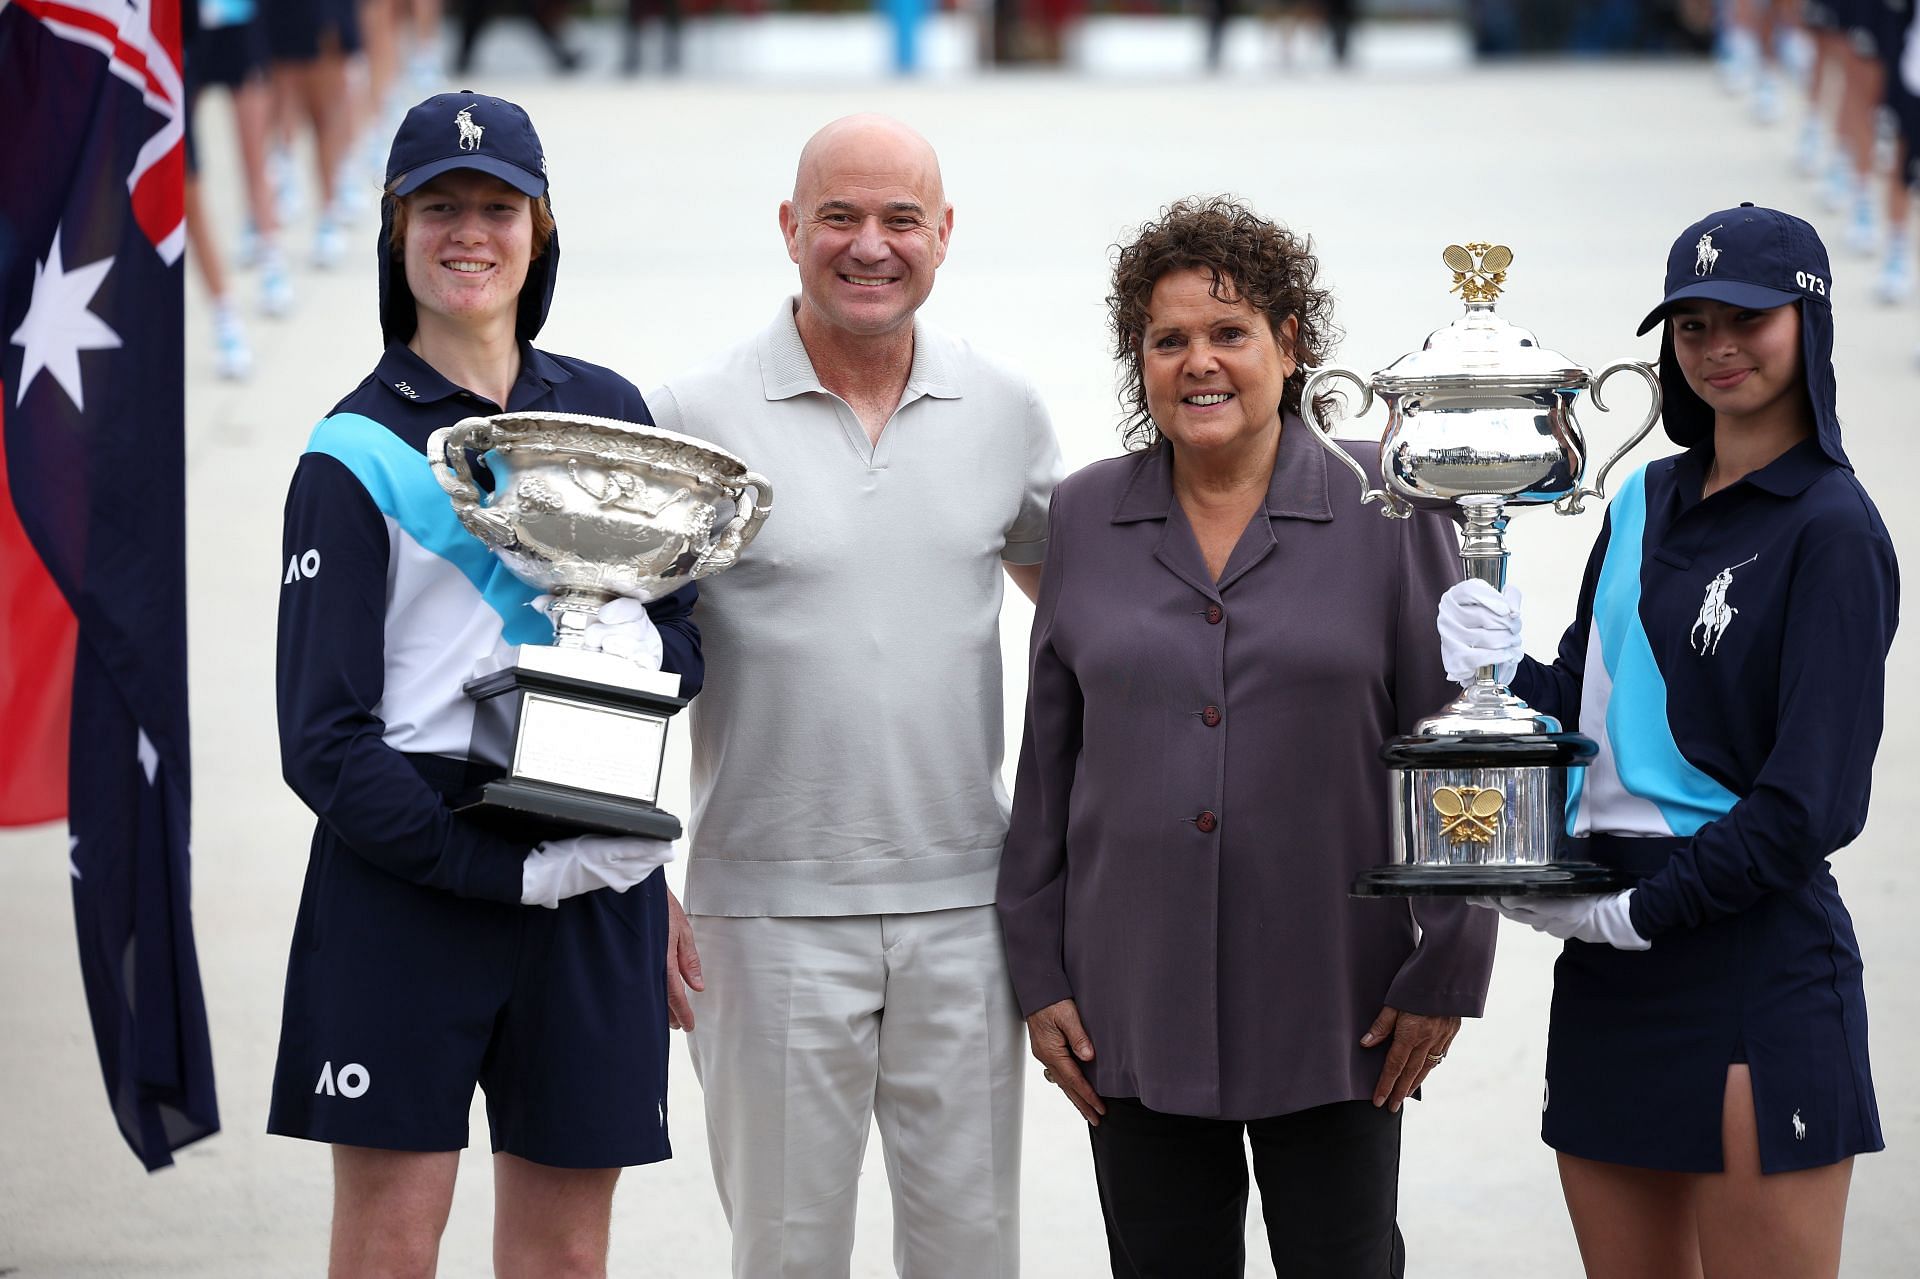 Andre Agassi and Evonne Goolagong Cawley at Australian Open 2024